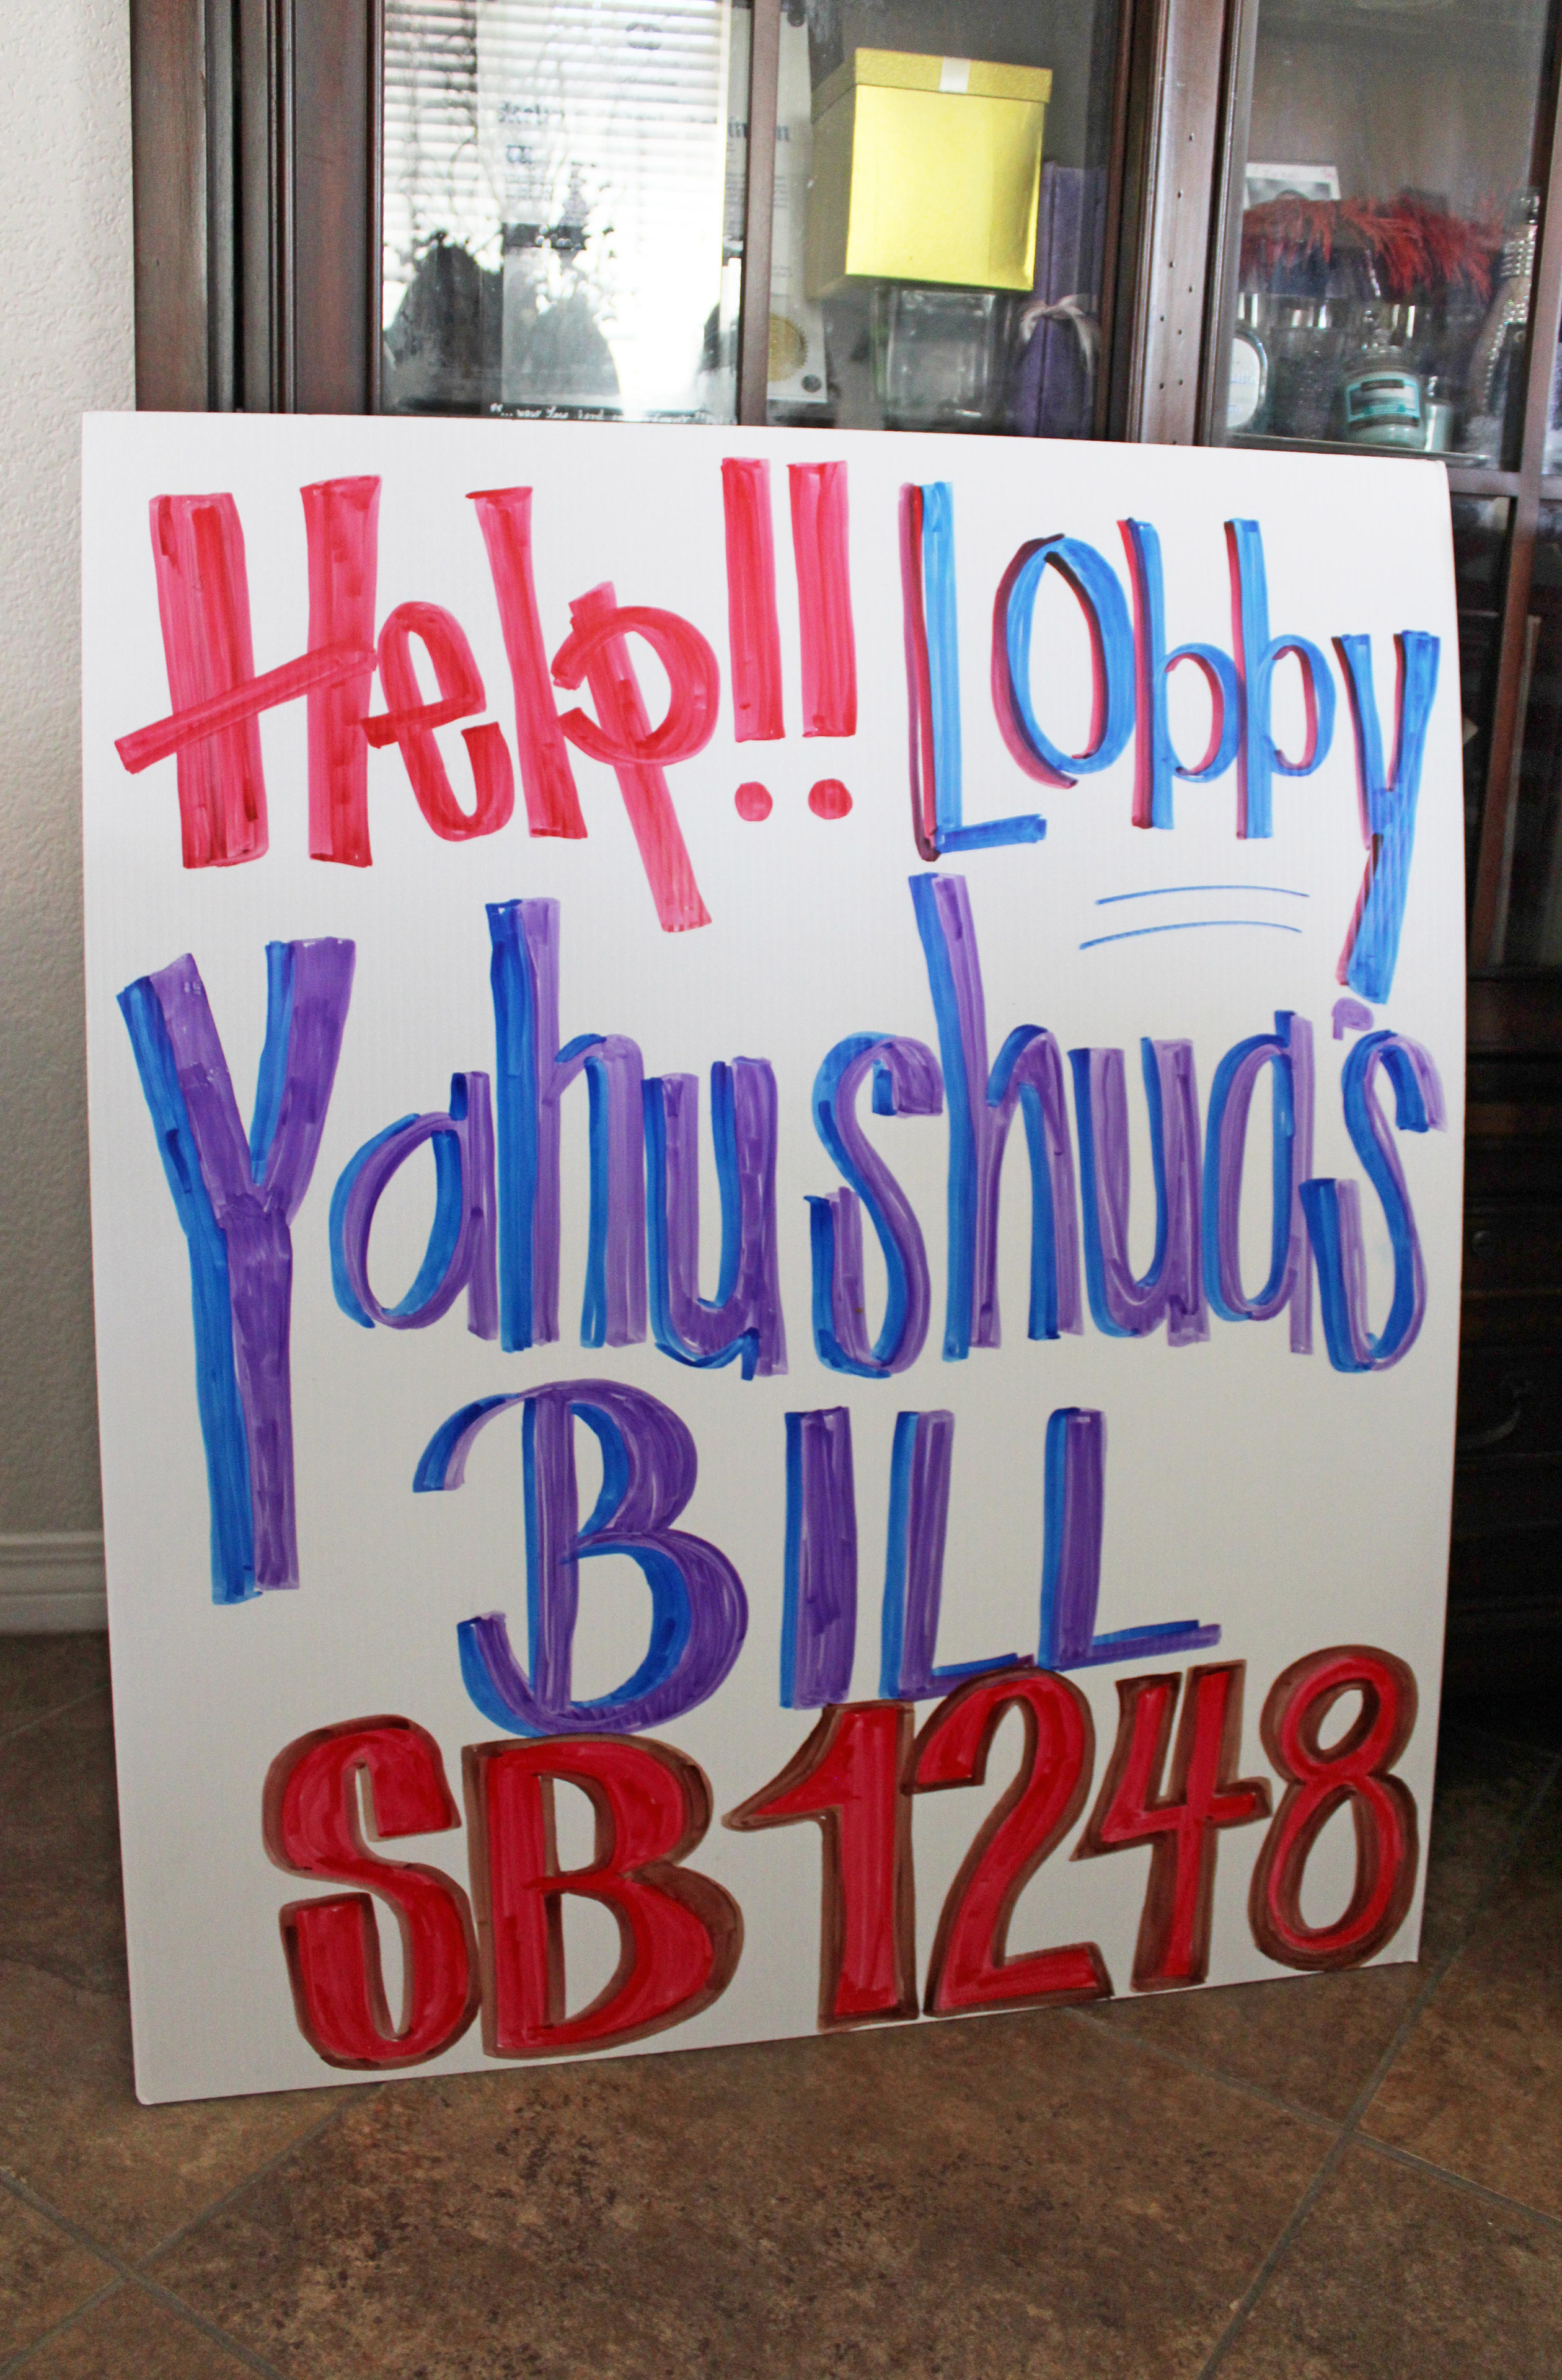 A hand-drawn sign, that is poster-size, reads, "Help!! Lobby Yahushua's Bill SB1248."